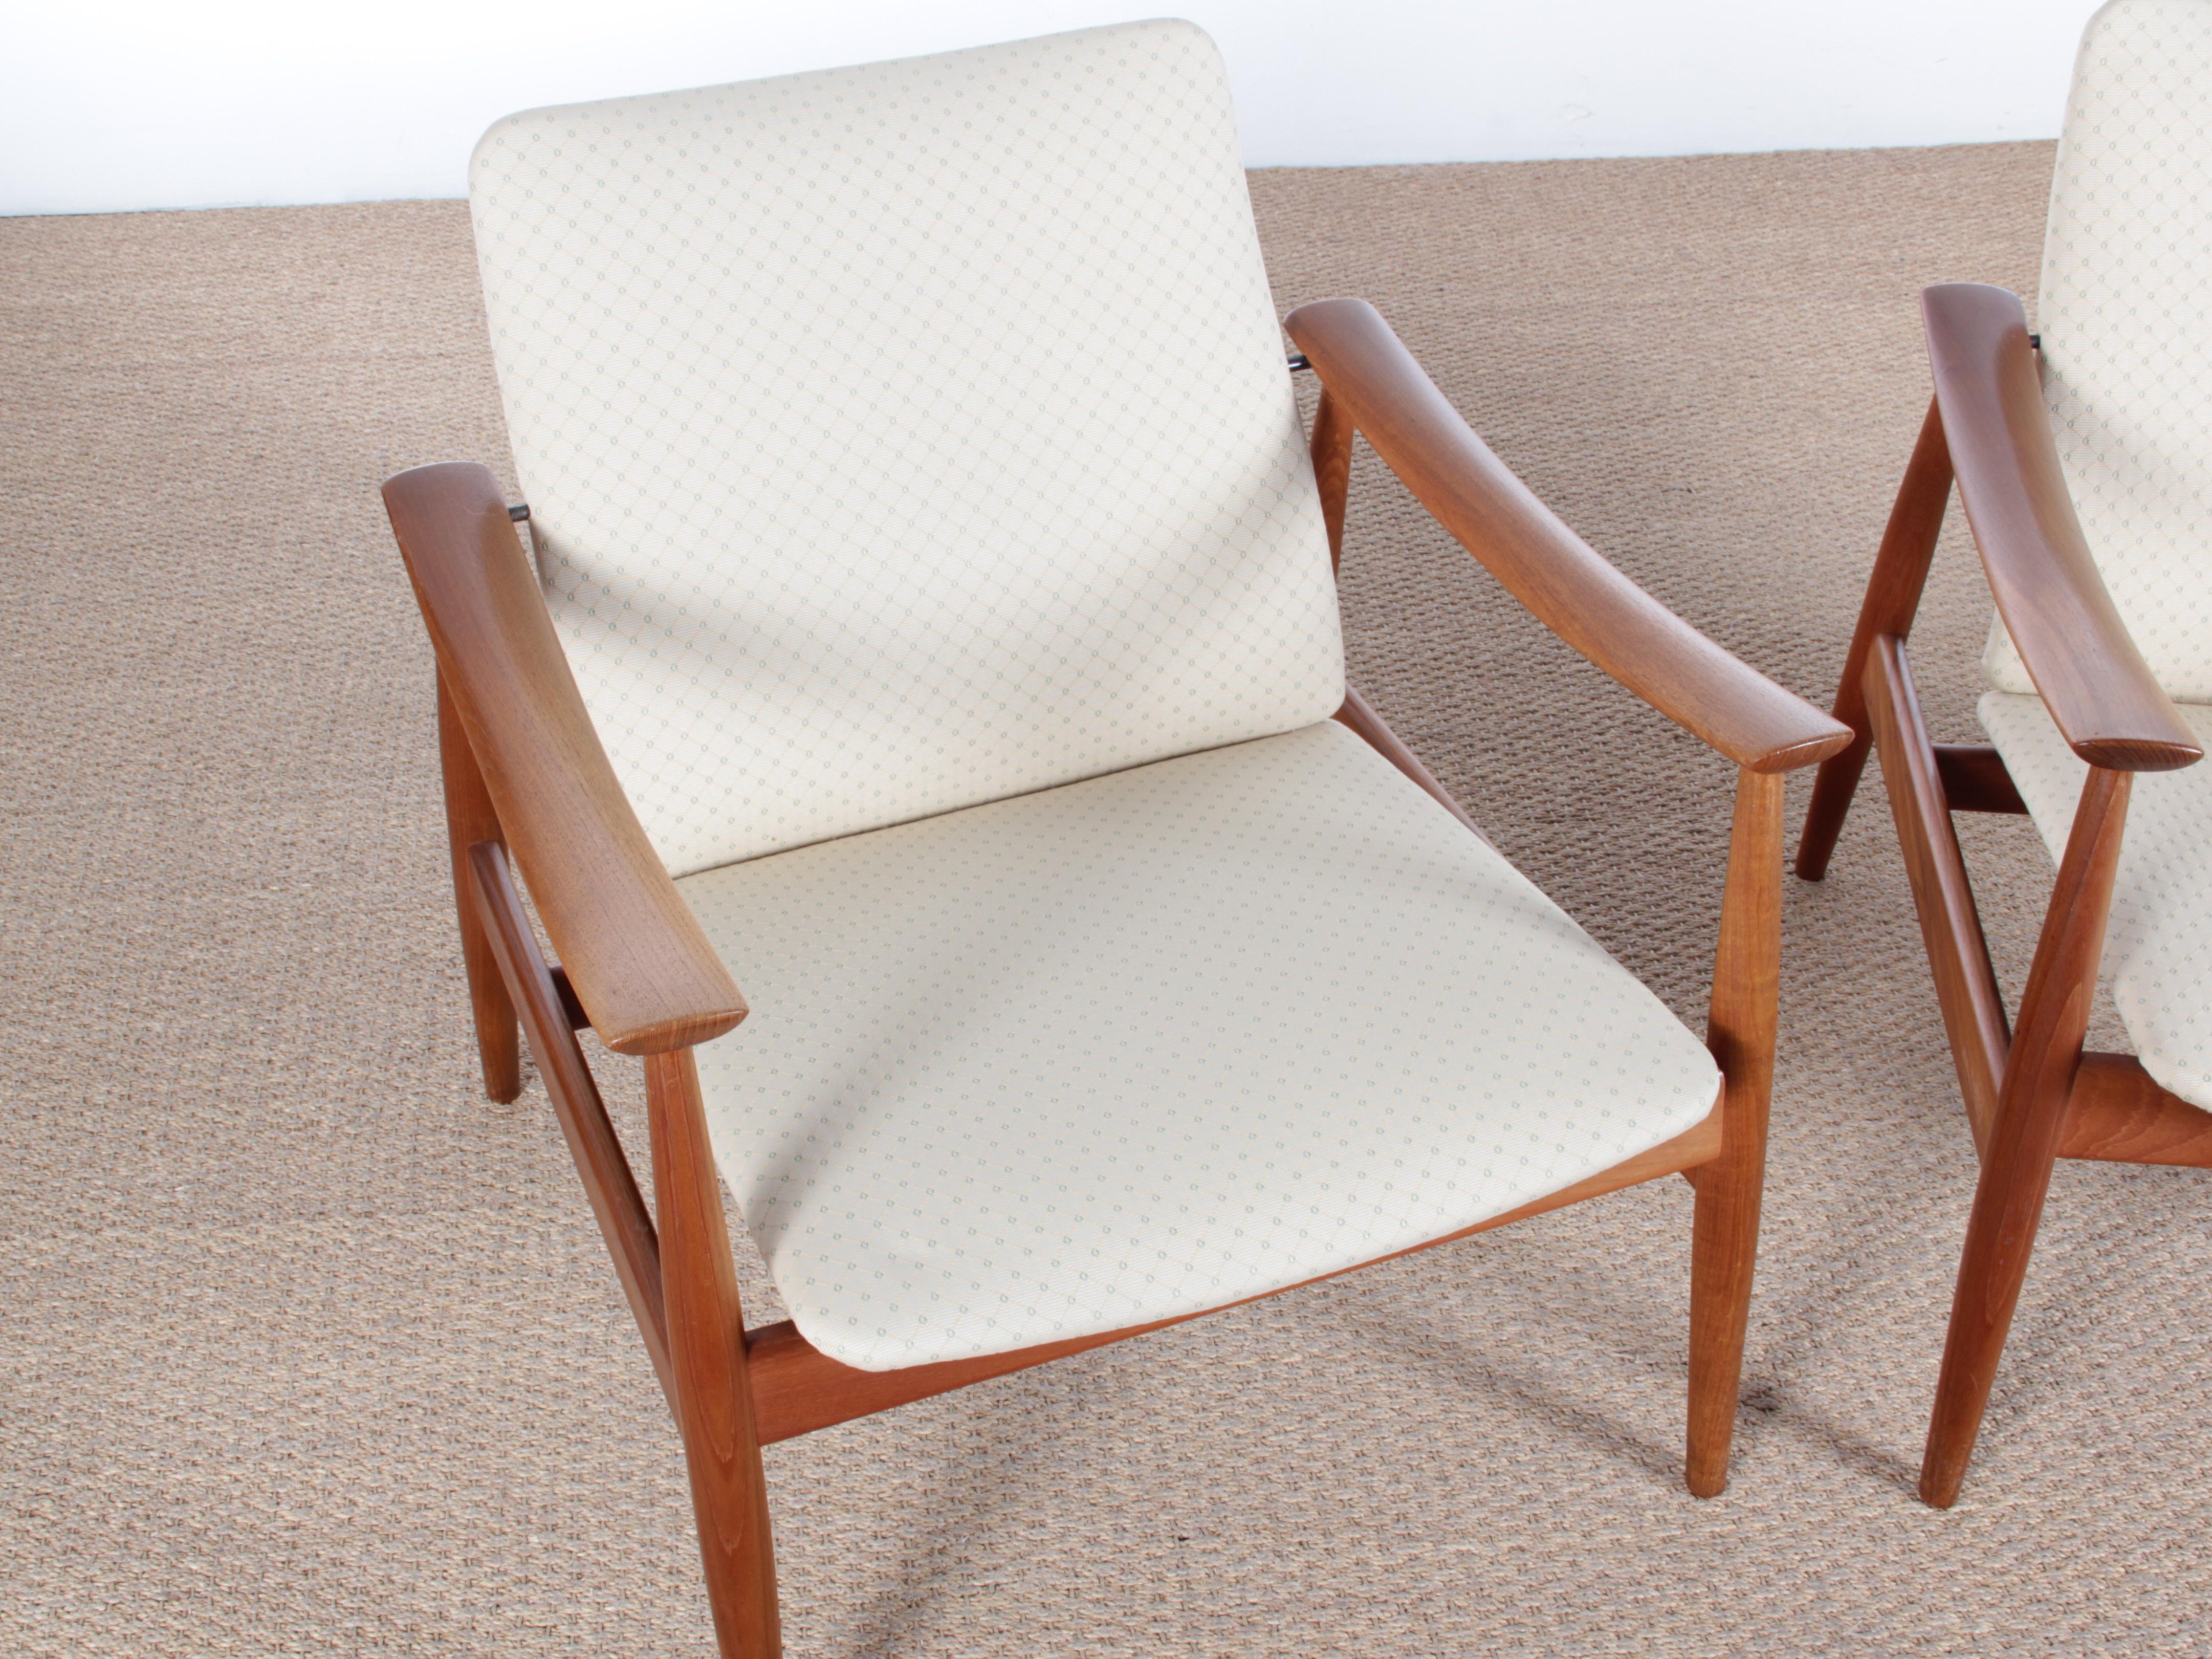 Mid-Century Modern Scandinavian pair of armchairs model 138 in teak by Finn Juhl. Upholstery from the 2000s. Referenced by the Design Museum Danmark under number RP02533. Bibliography : Dansk Kunsthåndværk ; Mobilia 1961.